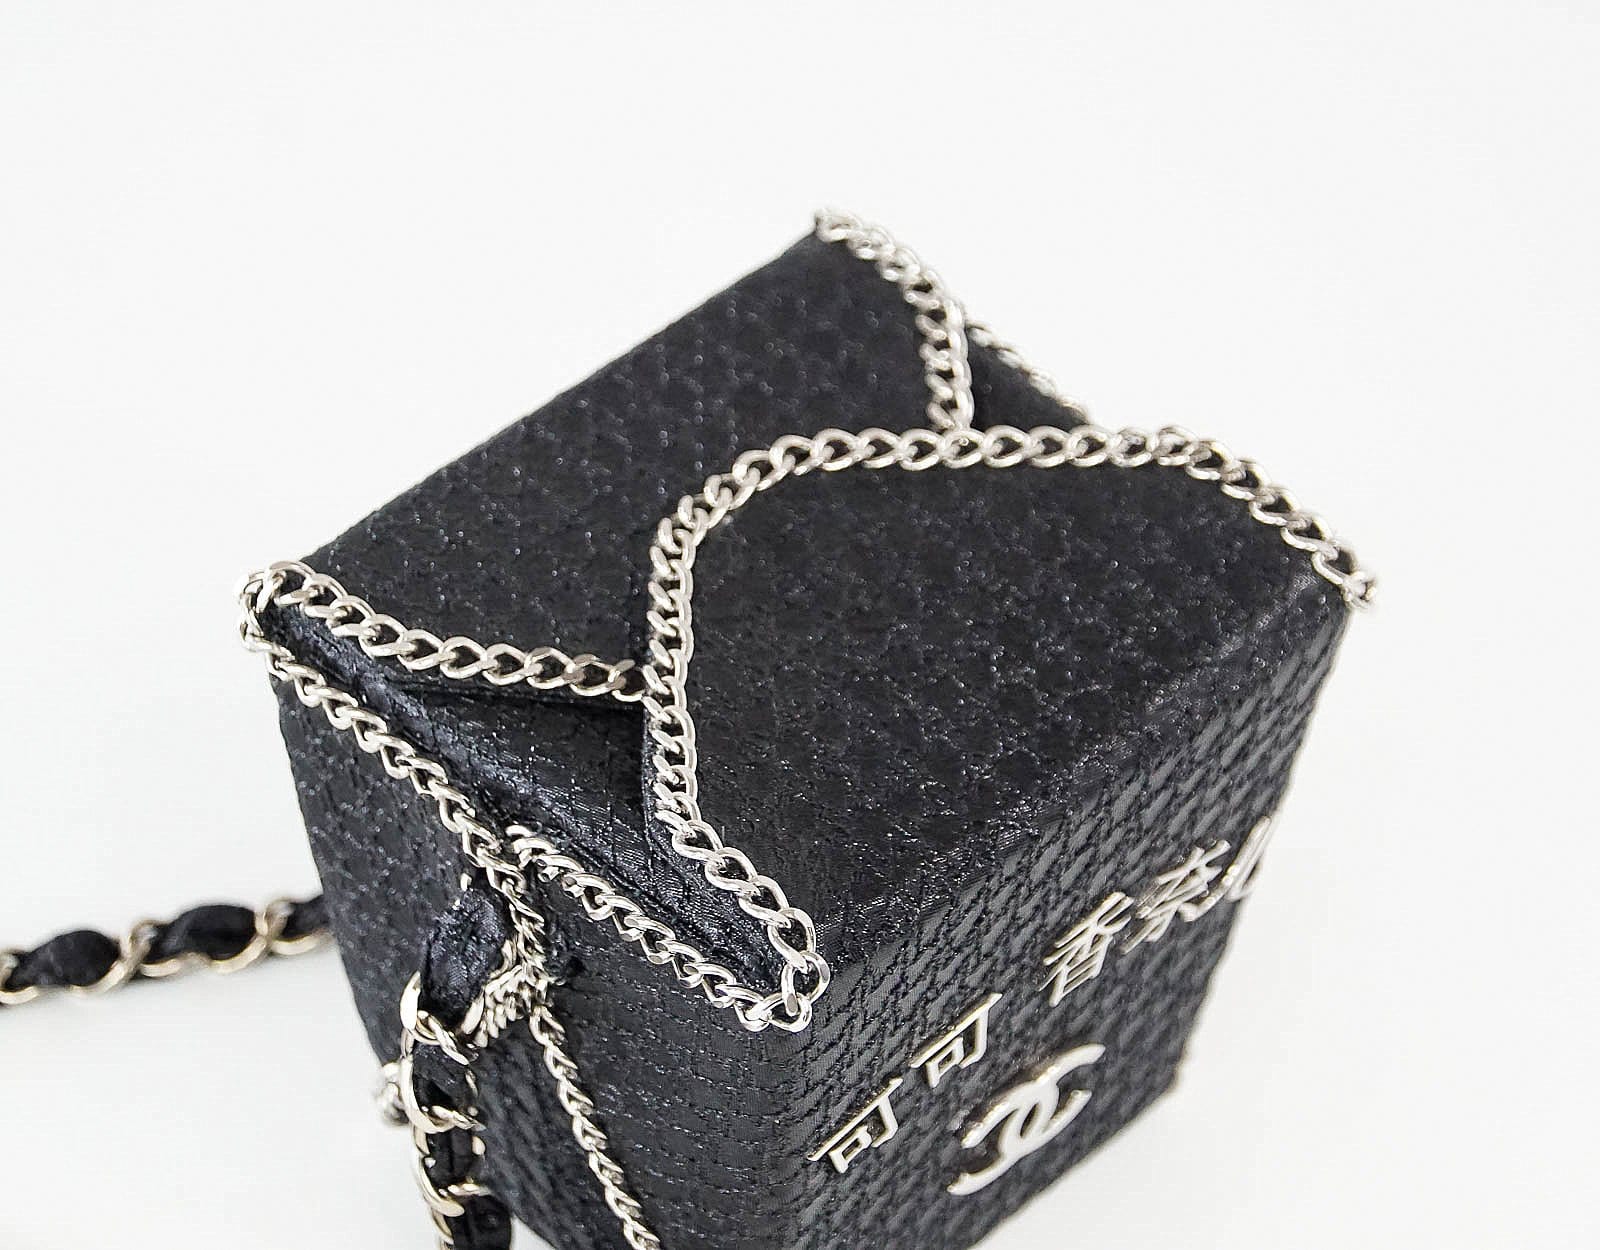 Chanel Take Away Box Bag Rare Limited Edition Runway Shanghai Collection - mightychic